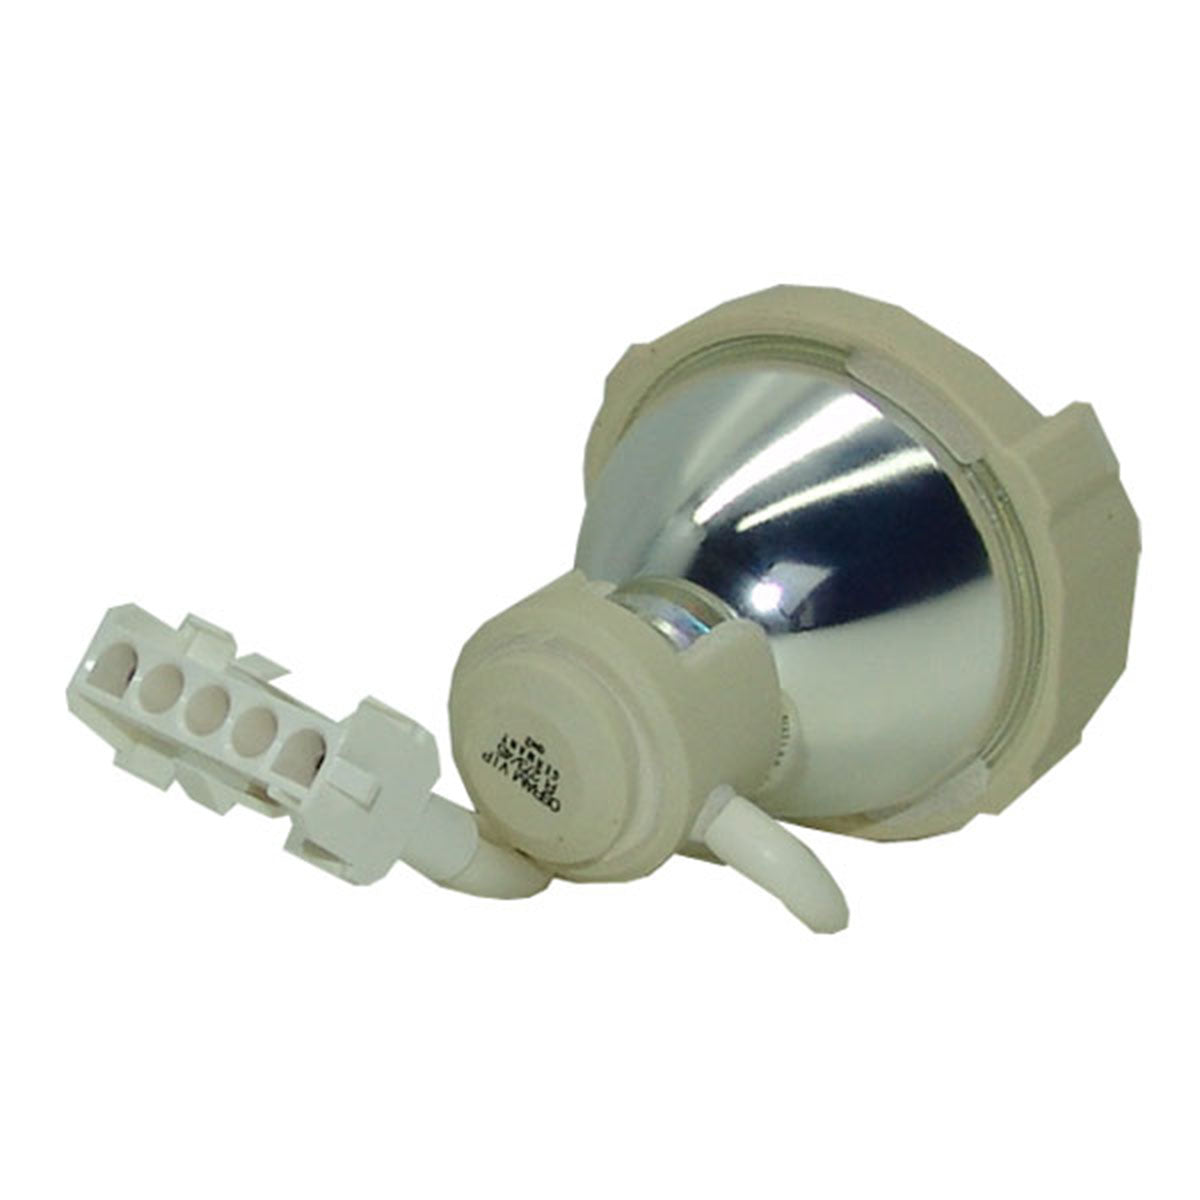 Knoll Systems 28-665 Osram Projector Bare Lamp